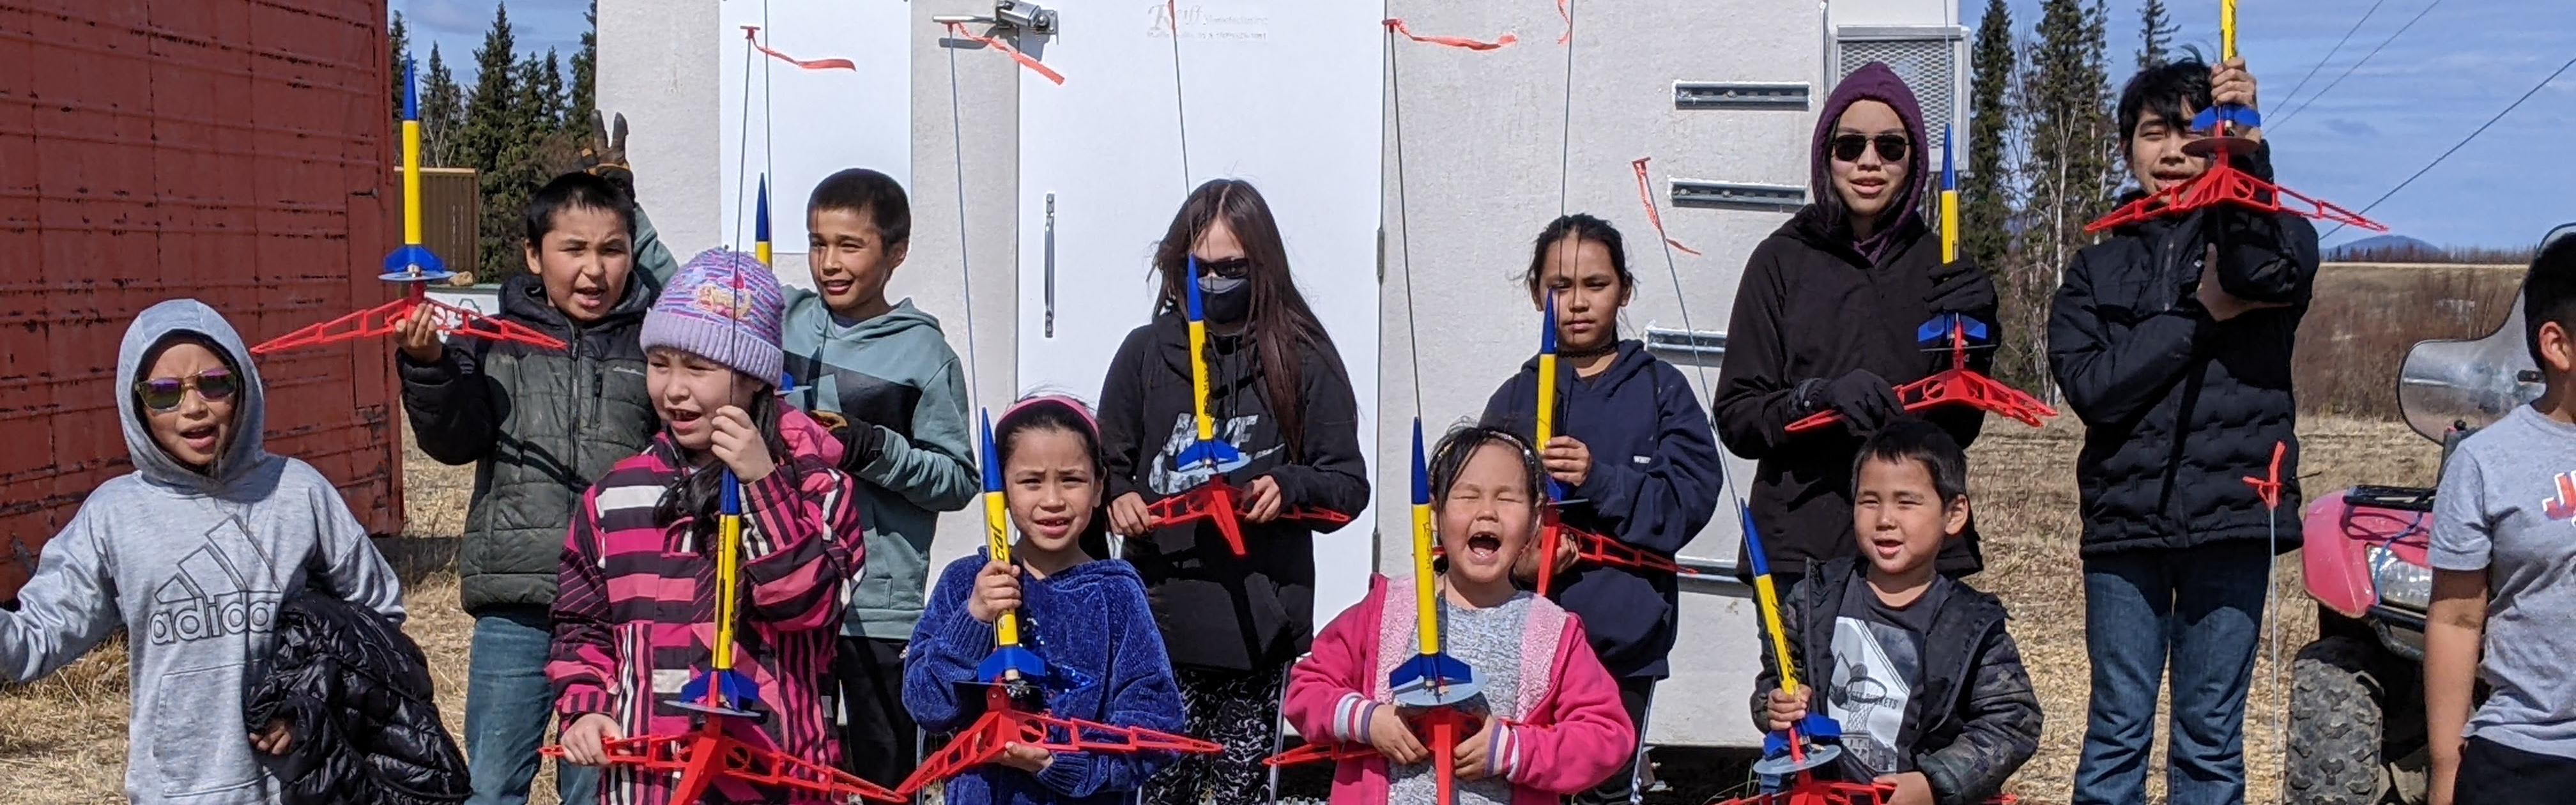 students with toy rockets